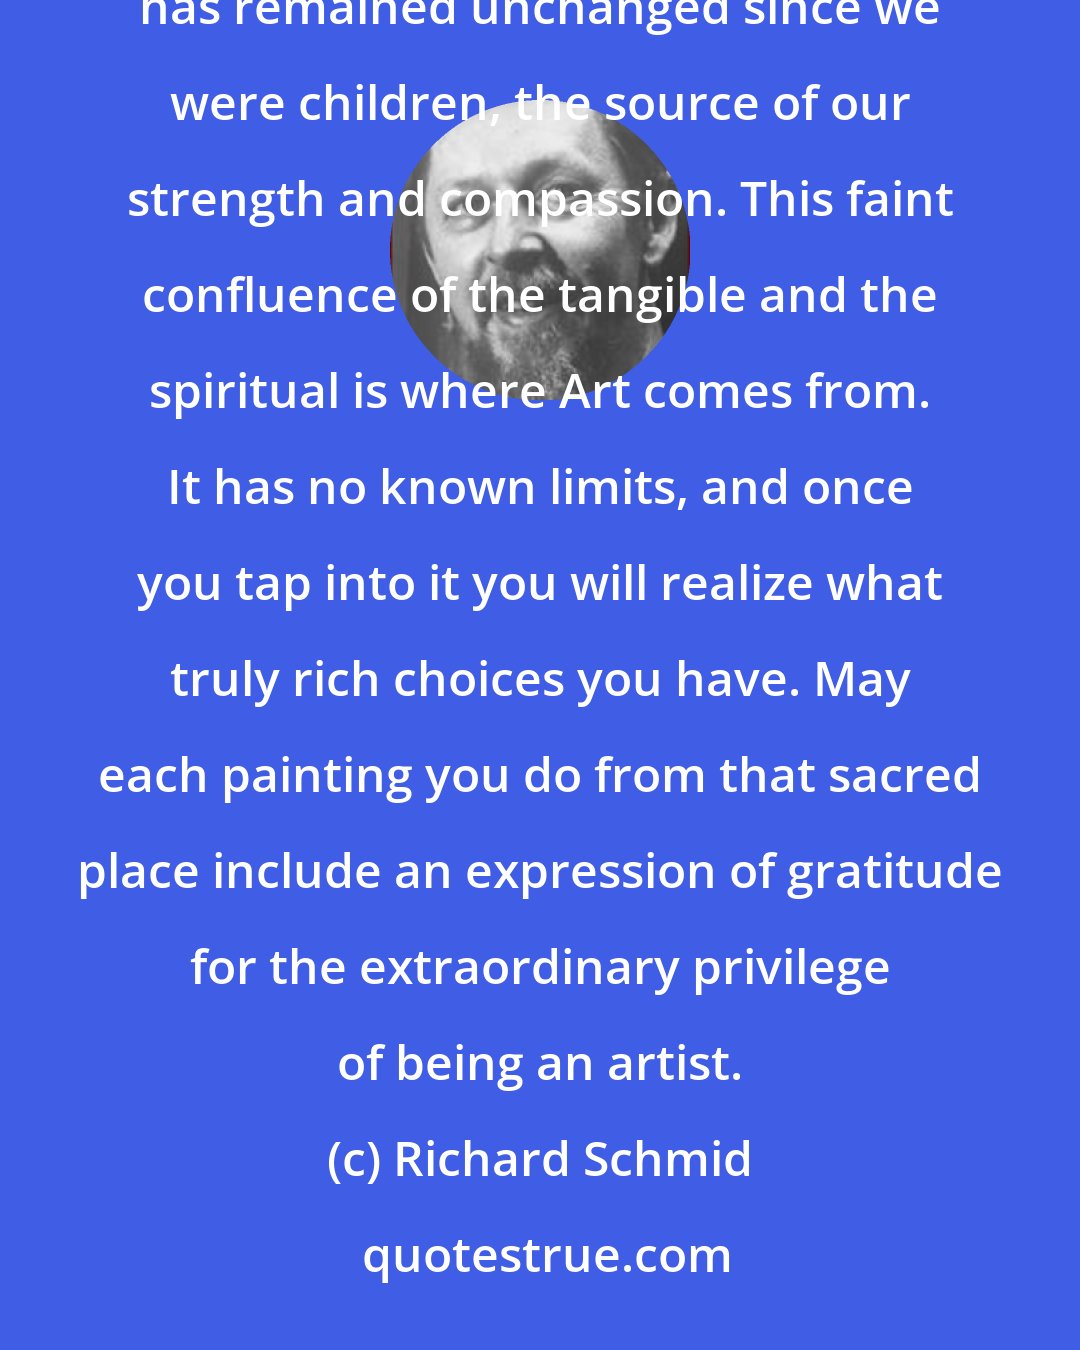 Richard Schmid: Somewhere within all of us is a wordless center, a part of us that hopes to be immortal in some way, a part that has remained unchanged since we were children, the source of our strength and compassion. This faint confluence of the tangible and the spiritual is where Art comes from. It has no known limits, and once you tap into it you will realize what truly rich choices you have. May each painting you do from that sacred place include an expression of gratitude for the extraordinary privilege of being an artist.